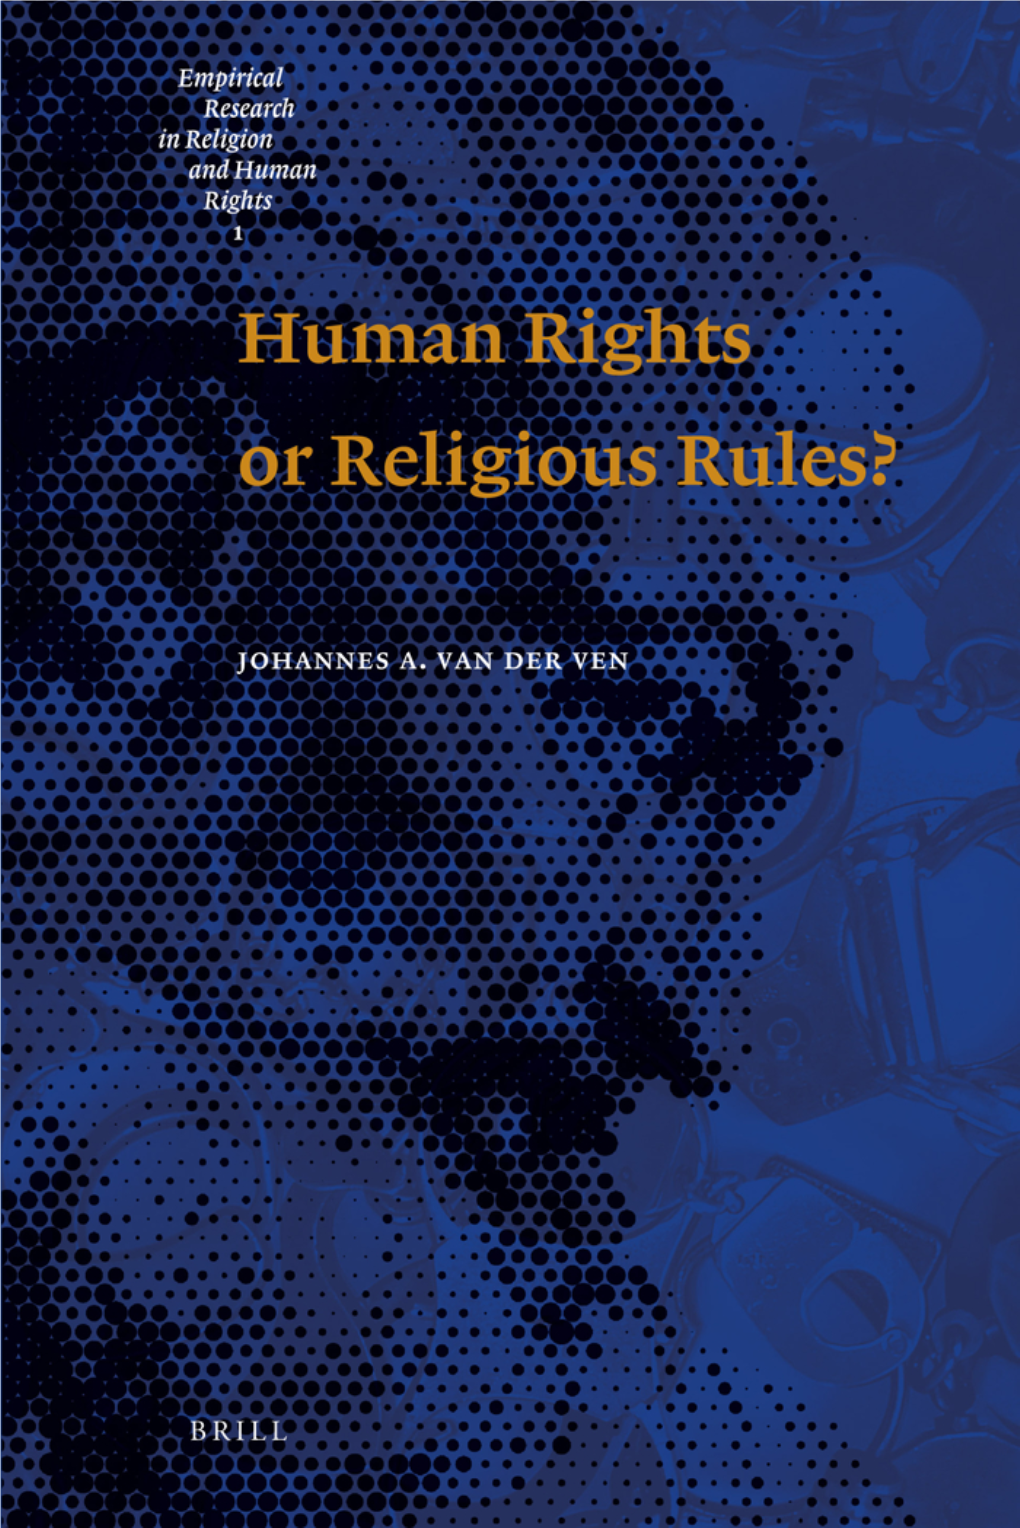 Human Rights Or Religious Rules? (Empirical Research in Religion